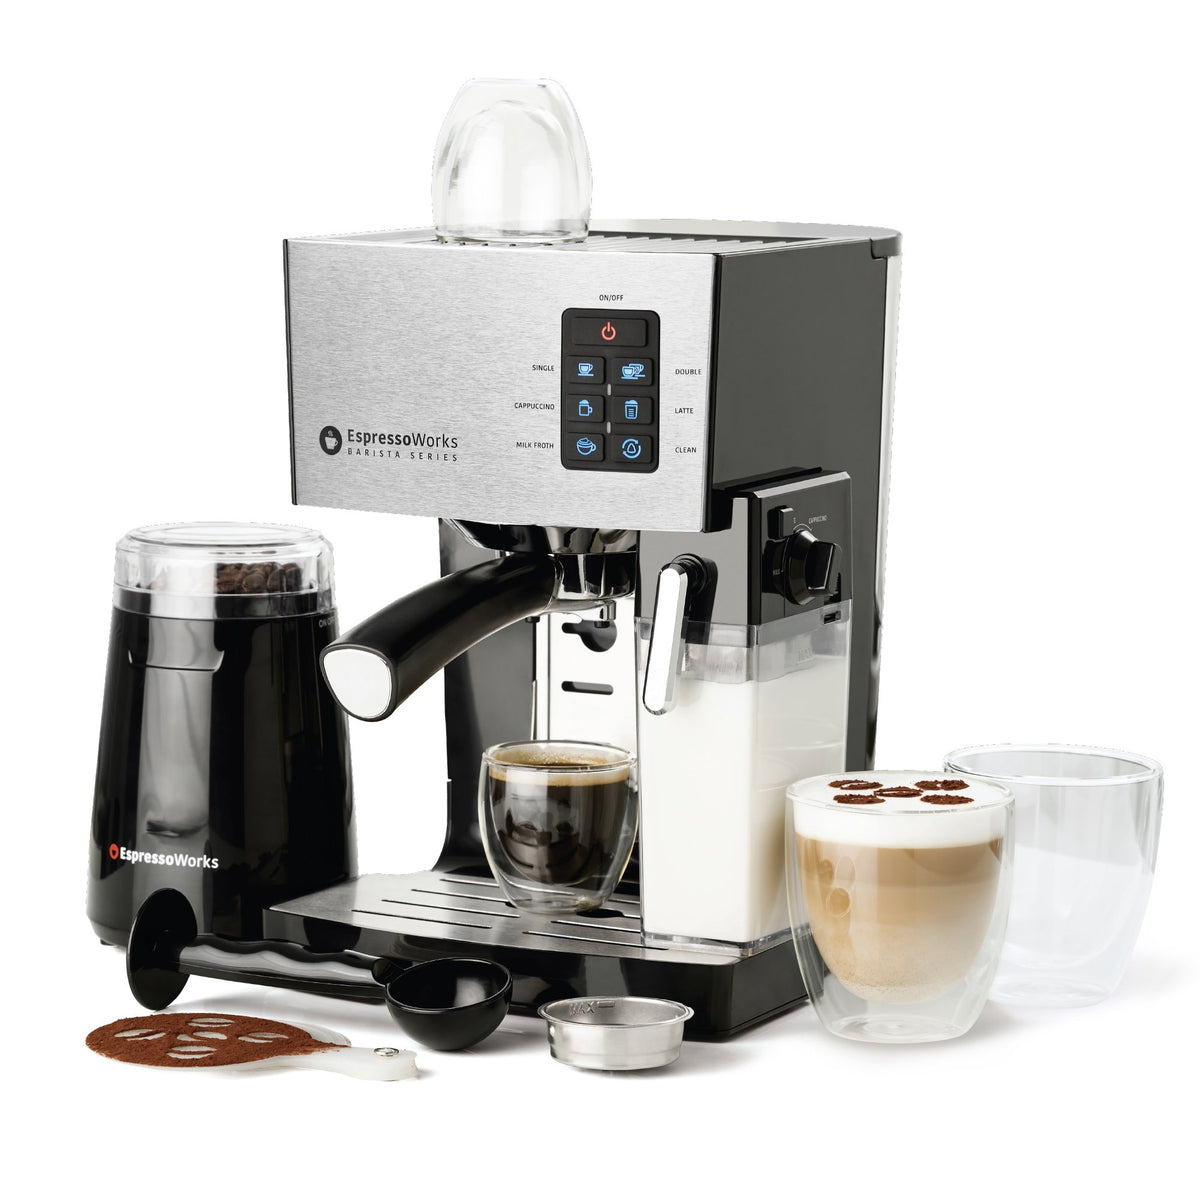 Replacement Water Tank for the EspressoWorks 10pc 19-bar Espresso and Cappuccino Maker Set